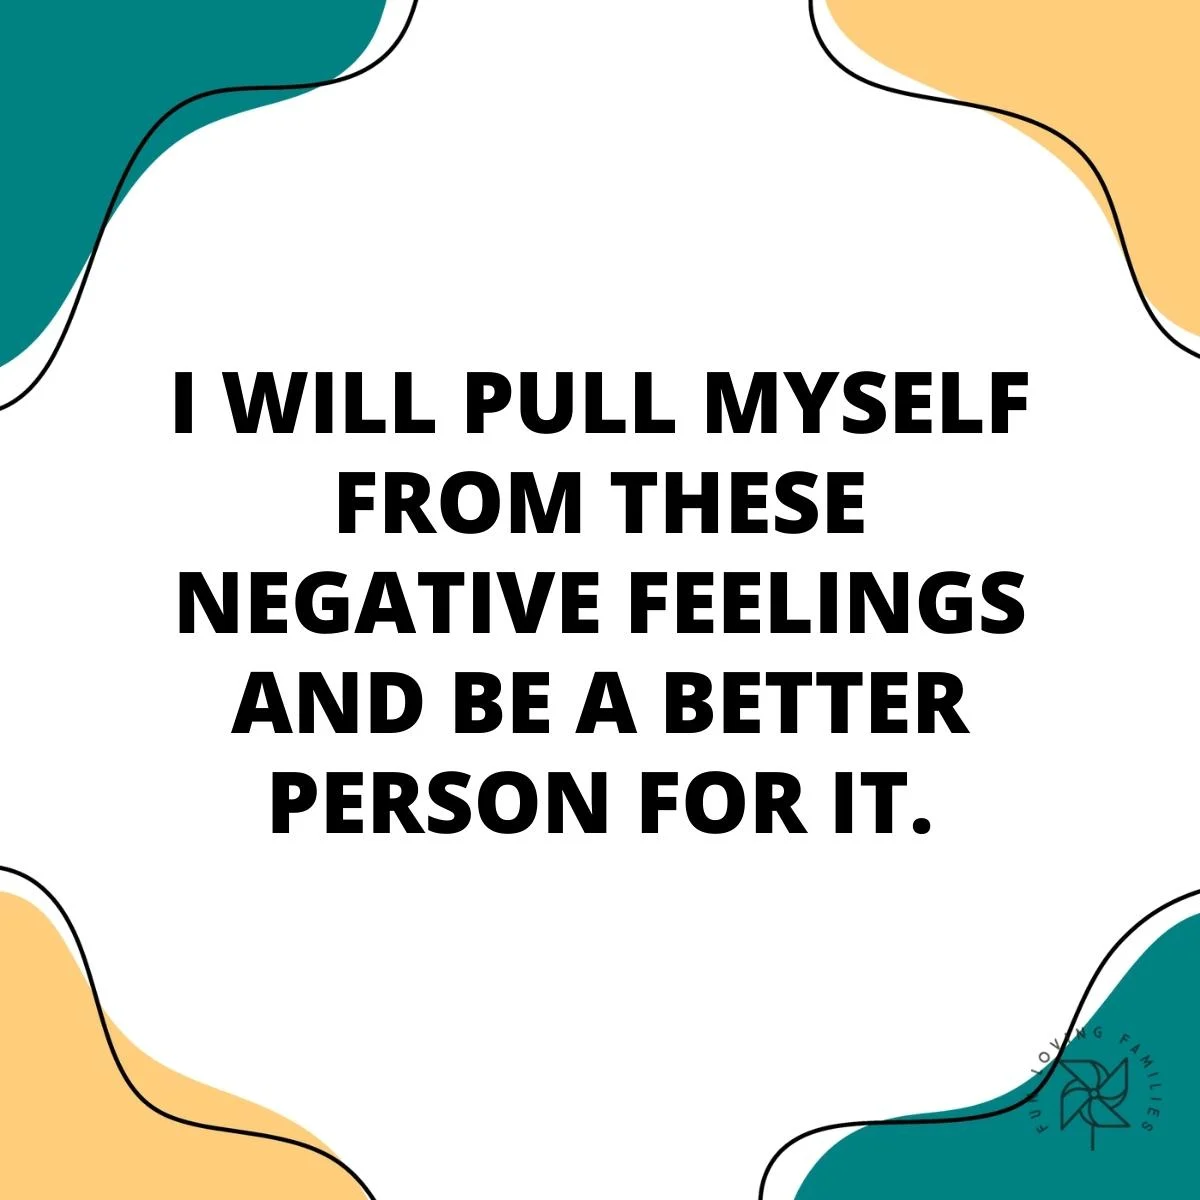 I will pull myself from these negative feelings affirmation